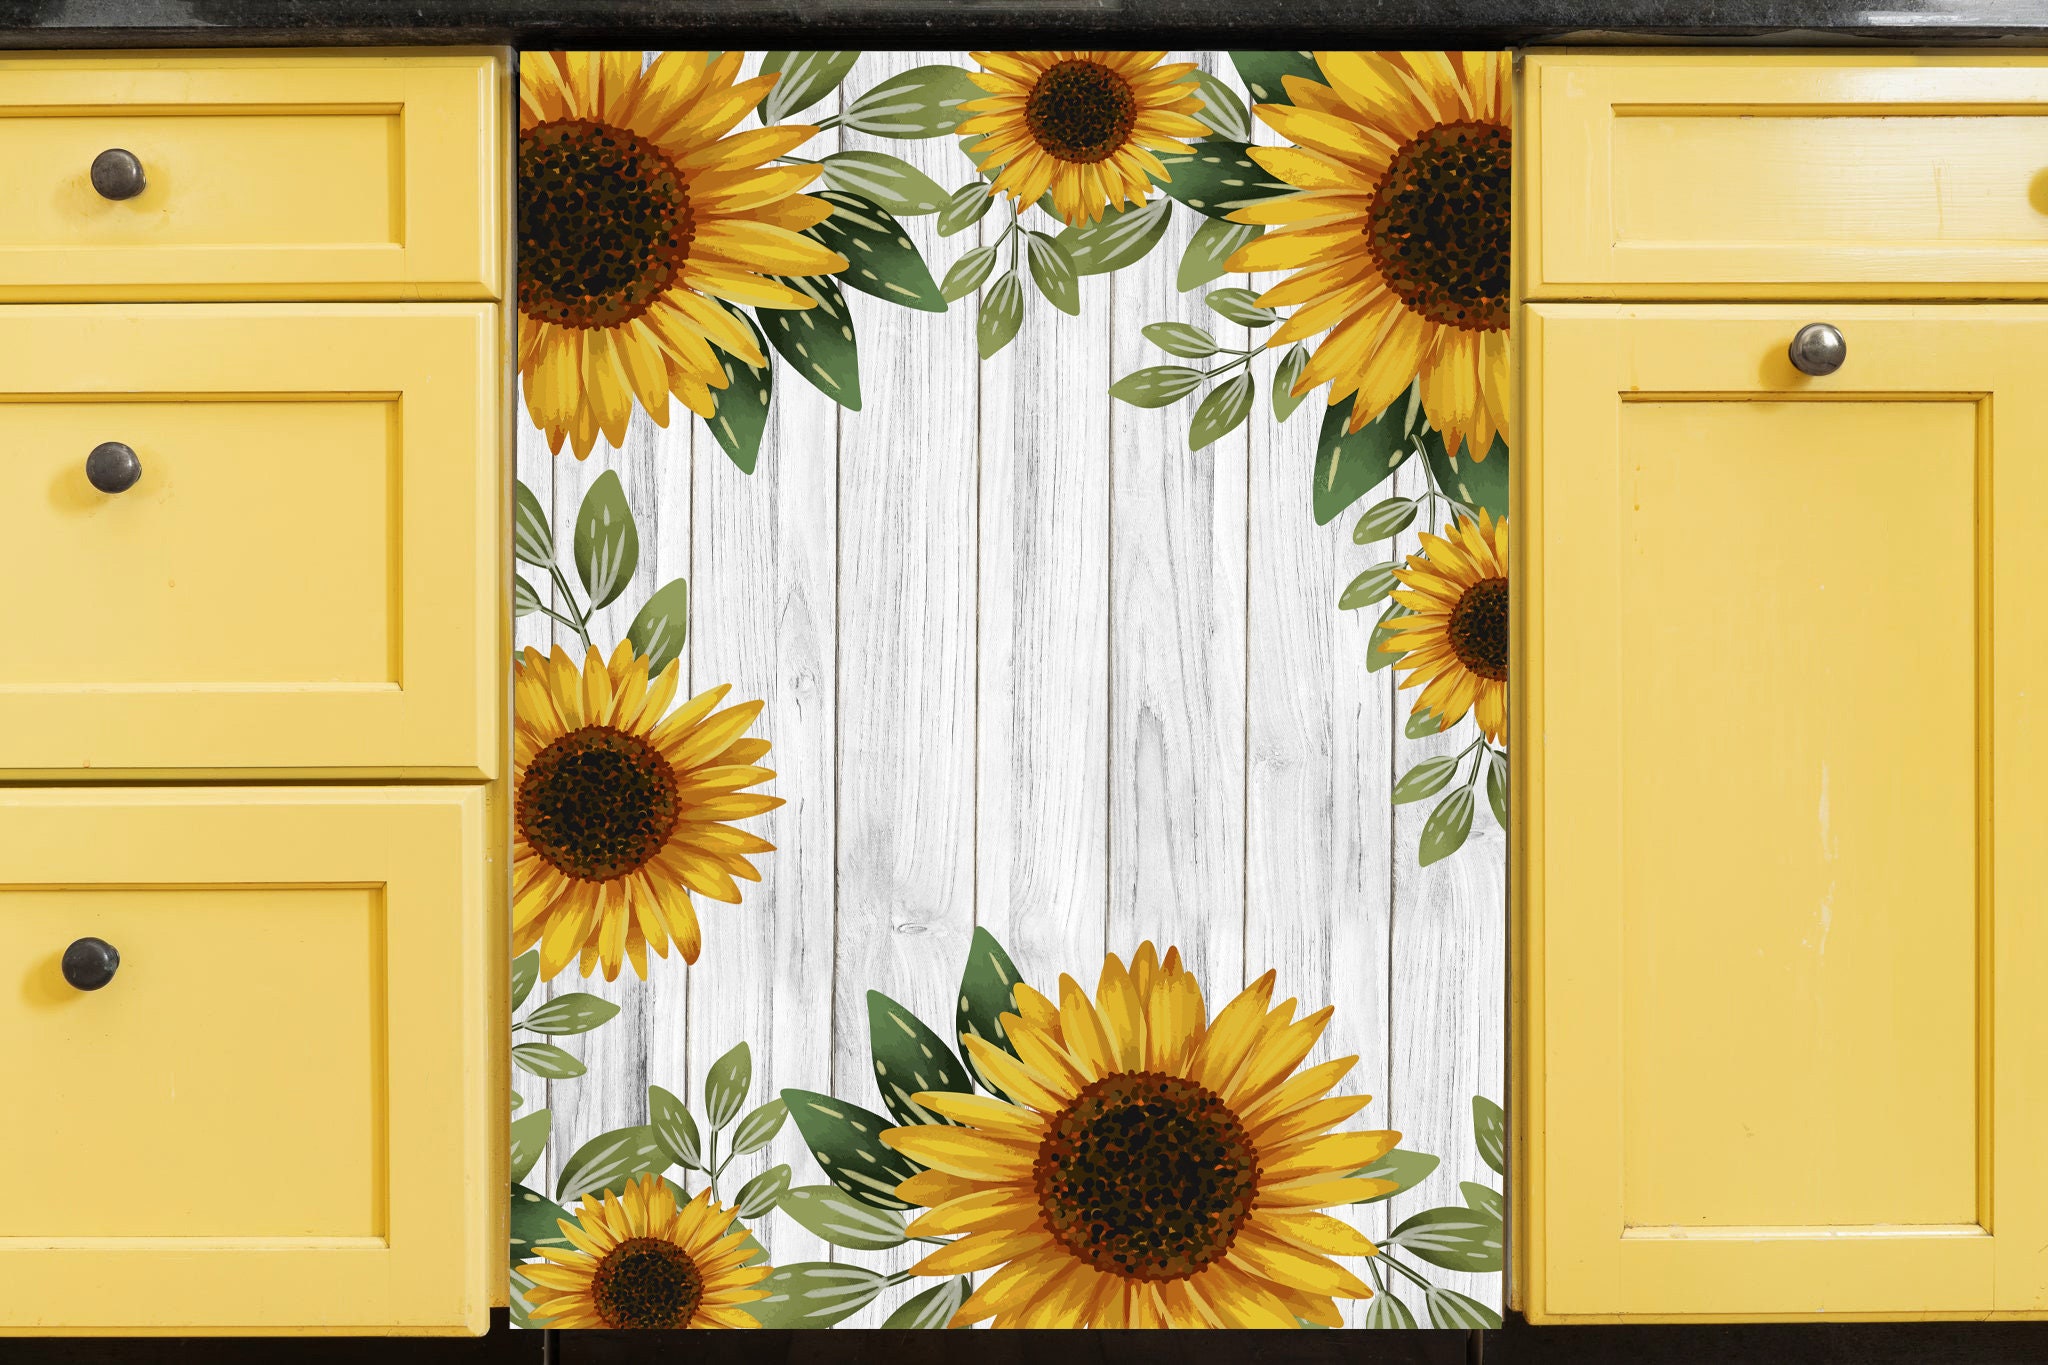  WOWFEEL Rustic Wooden Barn Door Dishwasher Magnet Cover Country  Fridge Vinyl Stickers, Vase Sunflower Refrigerator Magnetic Skins Cover  (Reusable, 23x17Magnetic) : Home & Kitchen